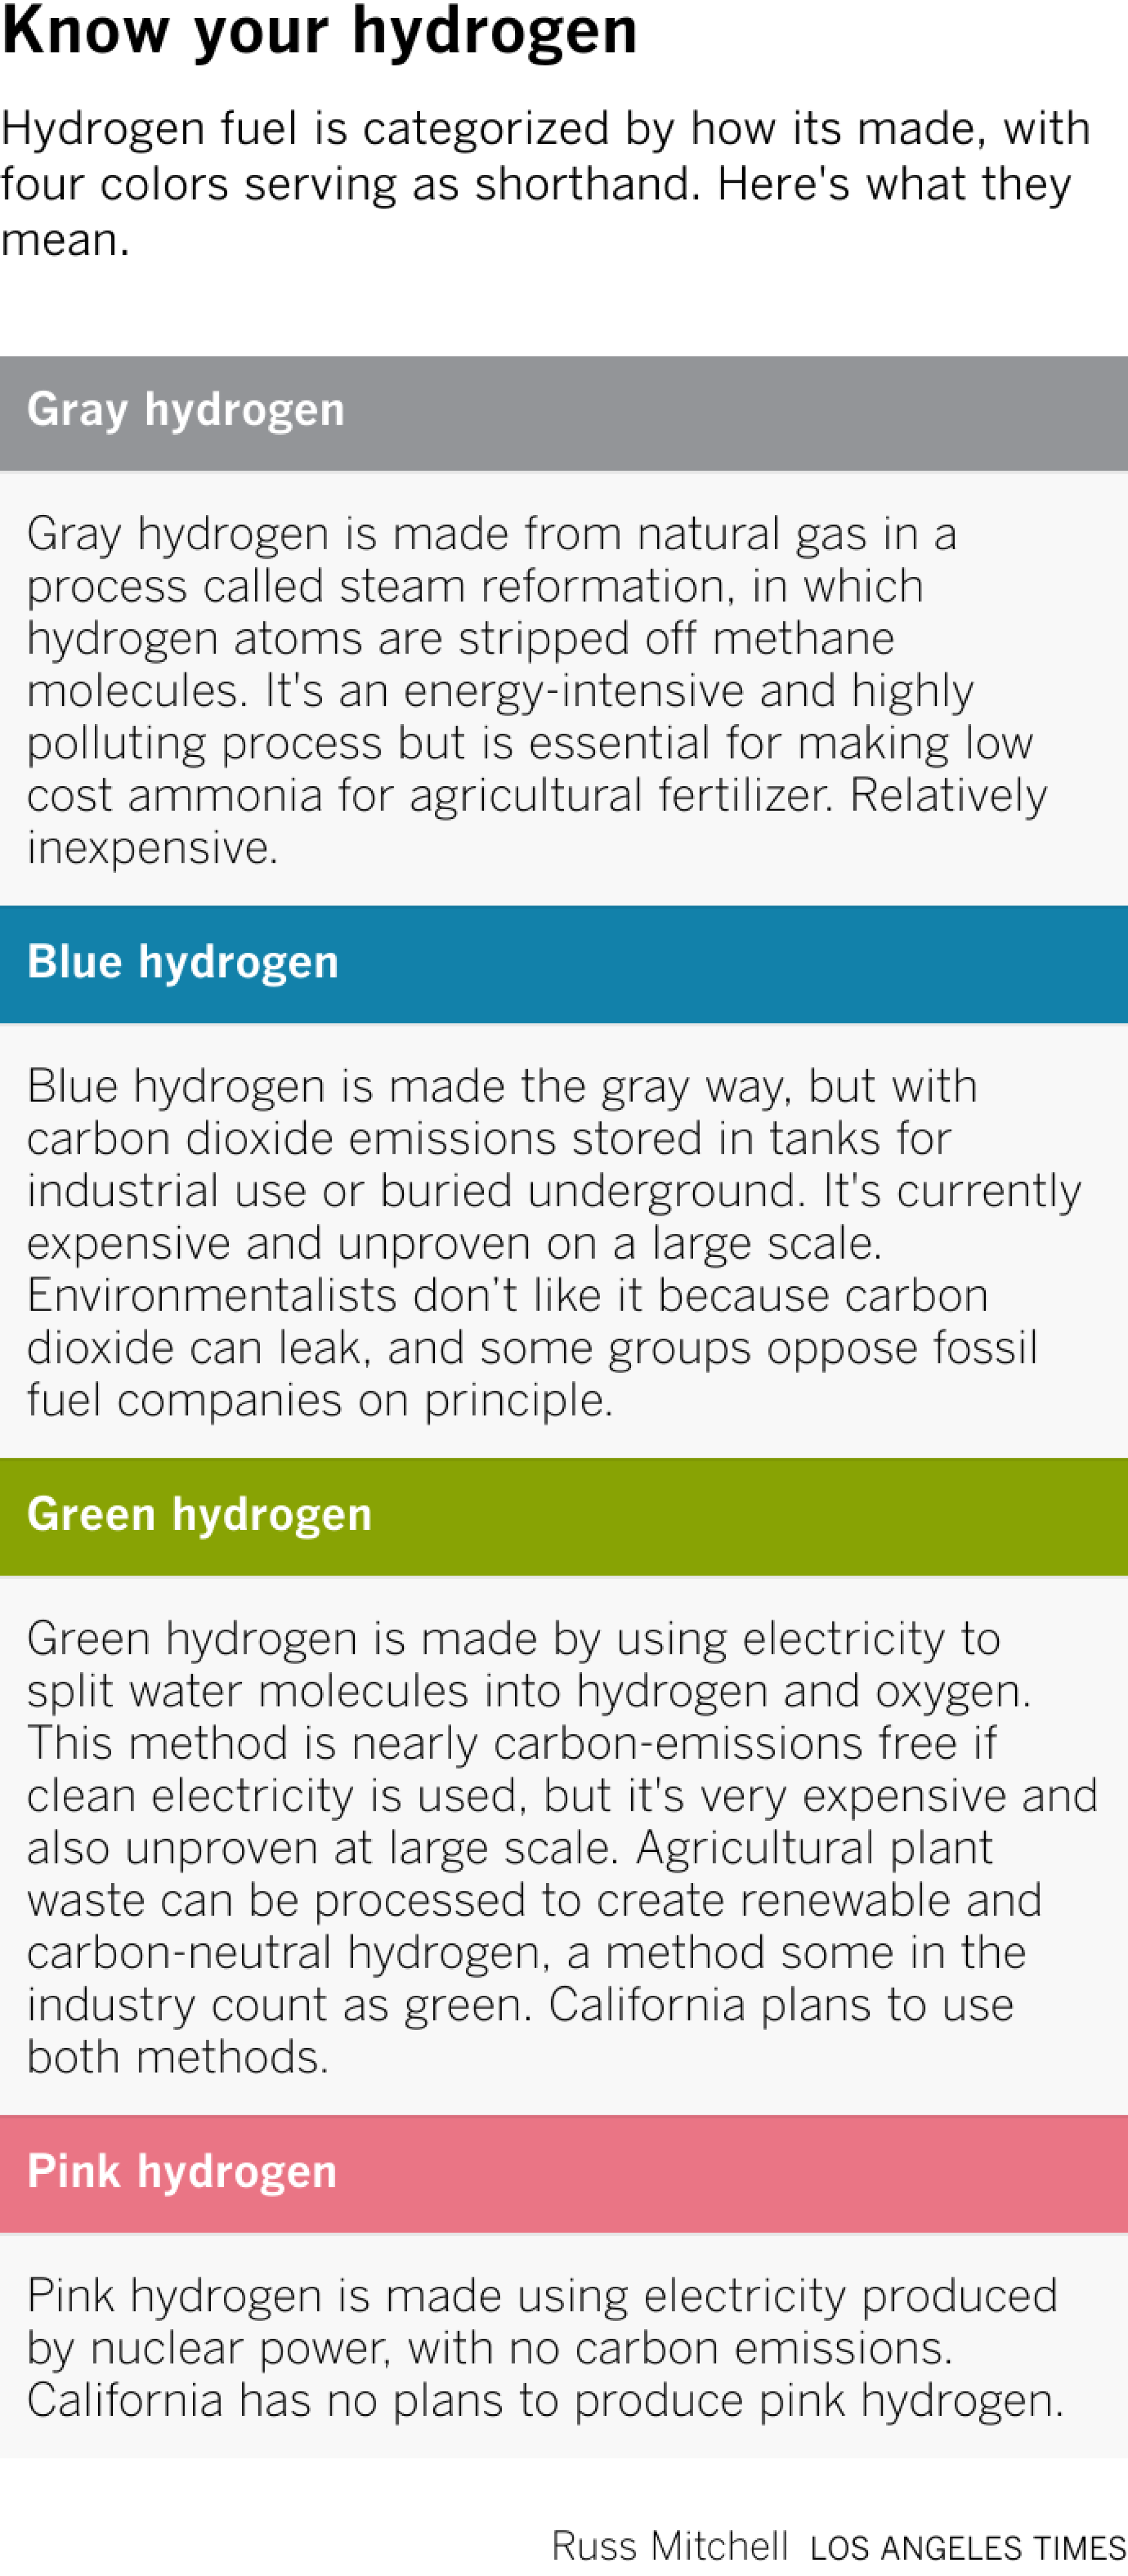 <span style="color: rgb(0, 0, 0);">Hydrogen fuel is categorized by how its made, with four colors serving as shorthand. Here's what they mean.</span>